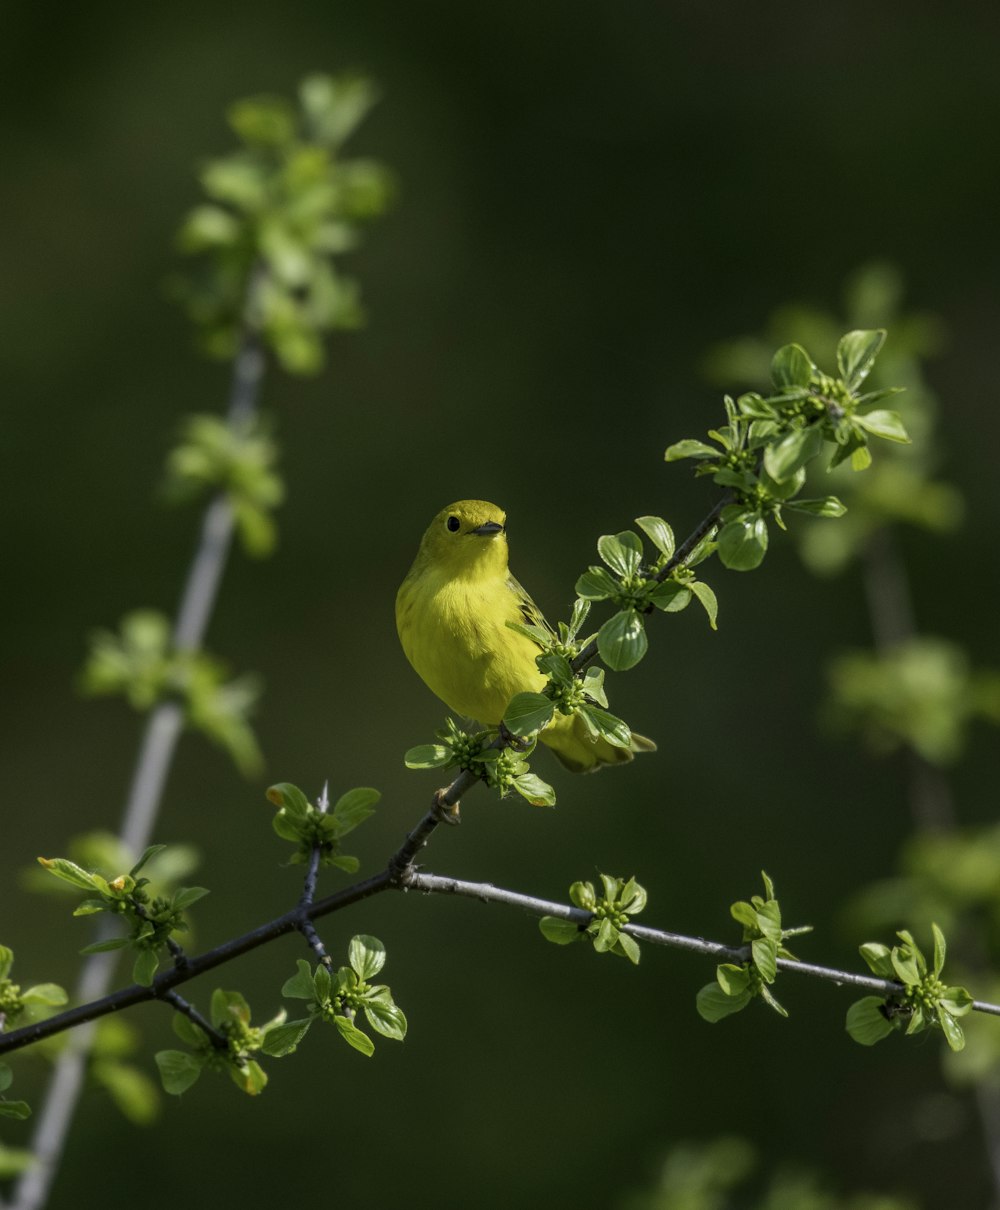 yellow bird on green plant during daytime